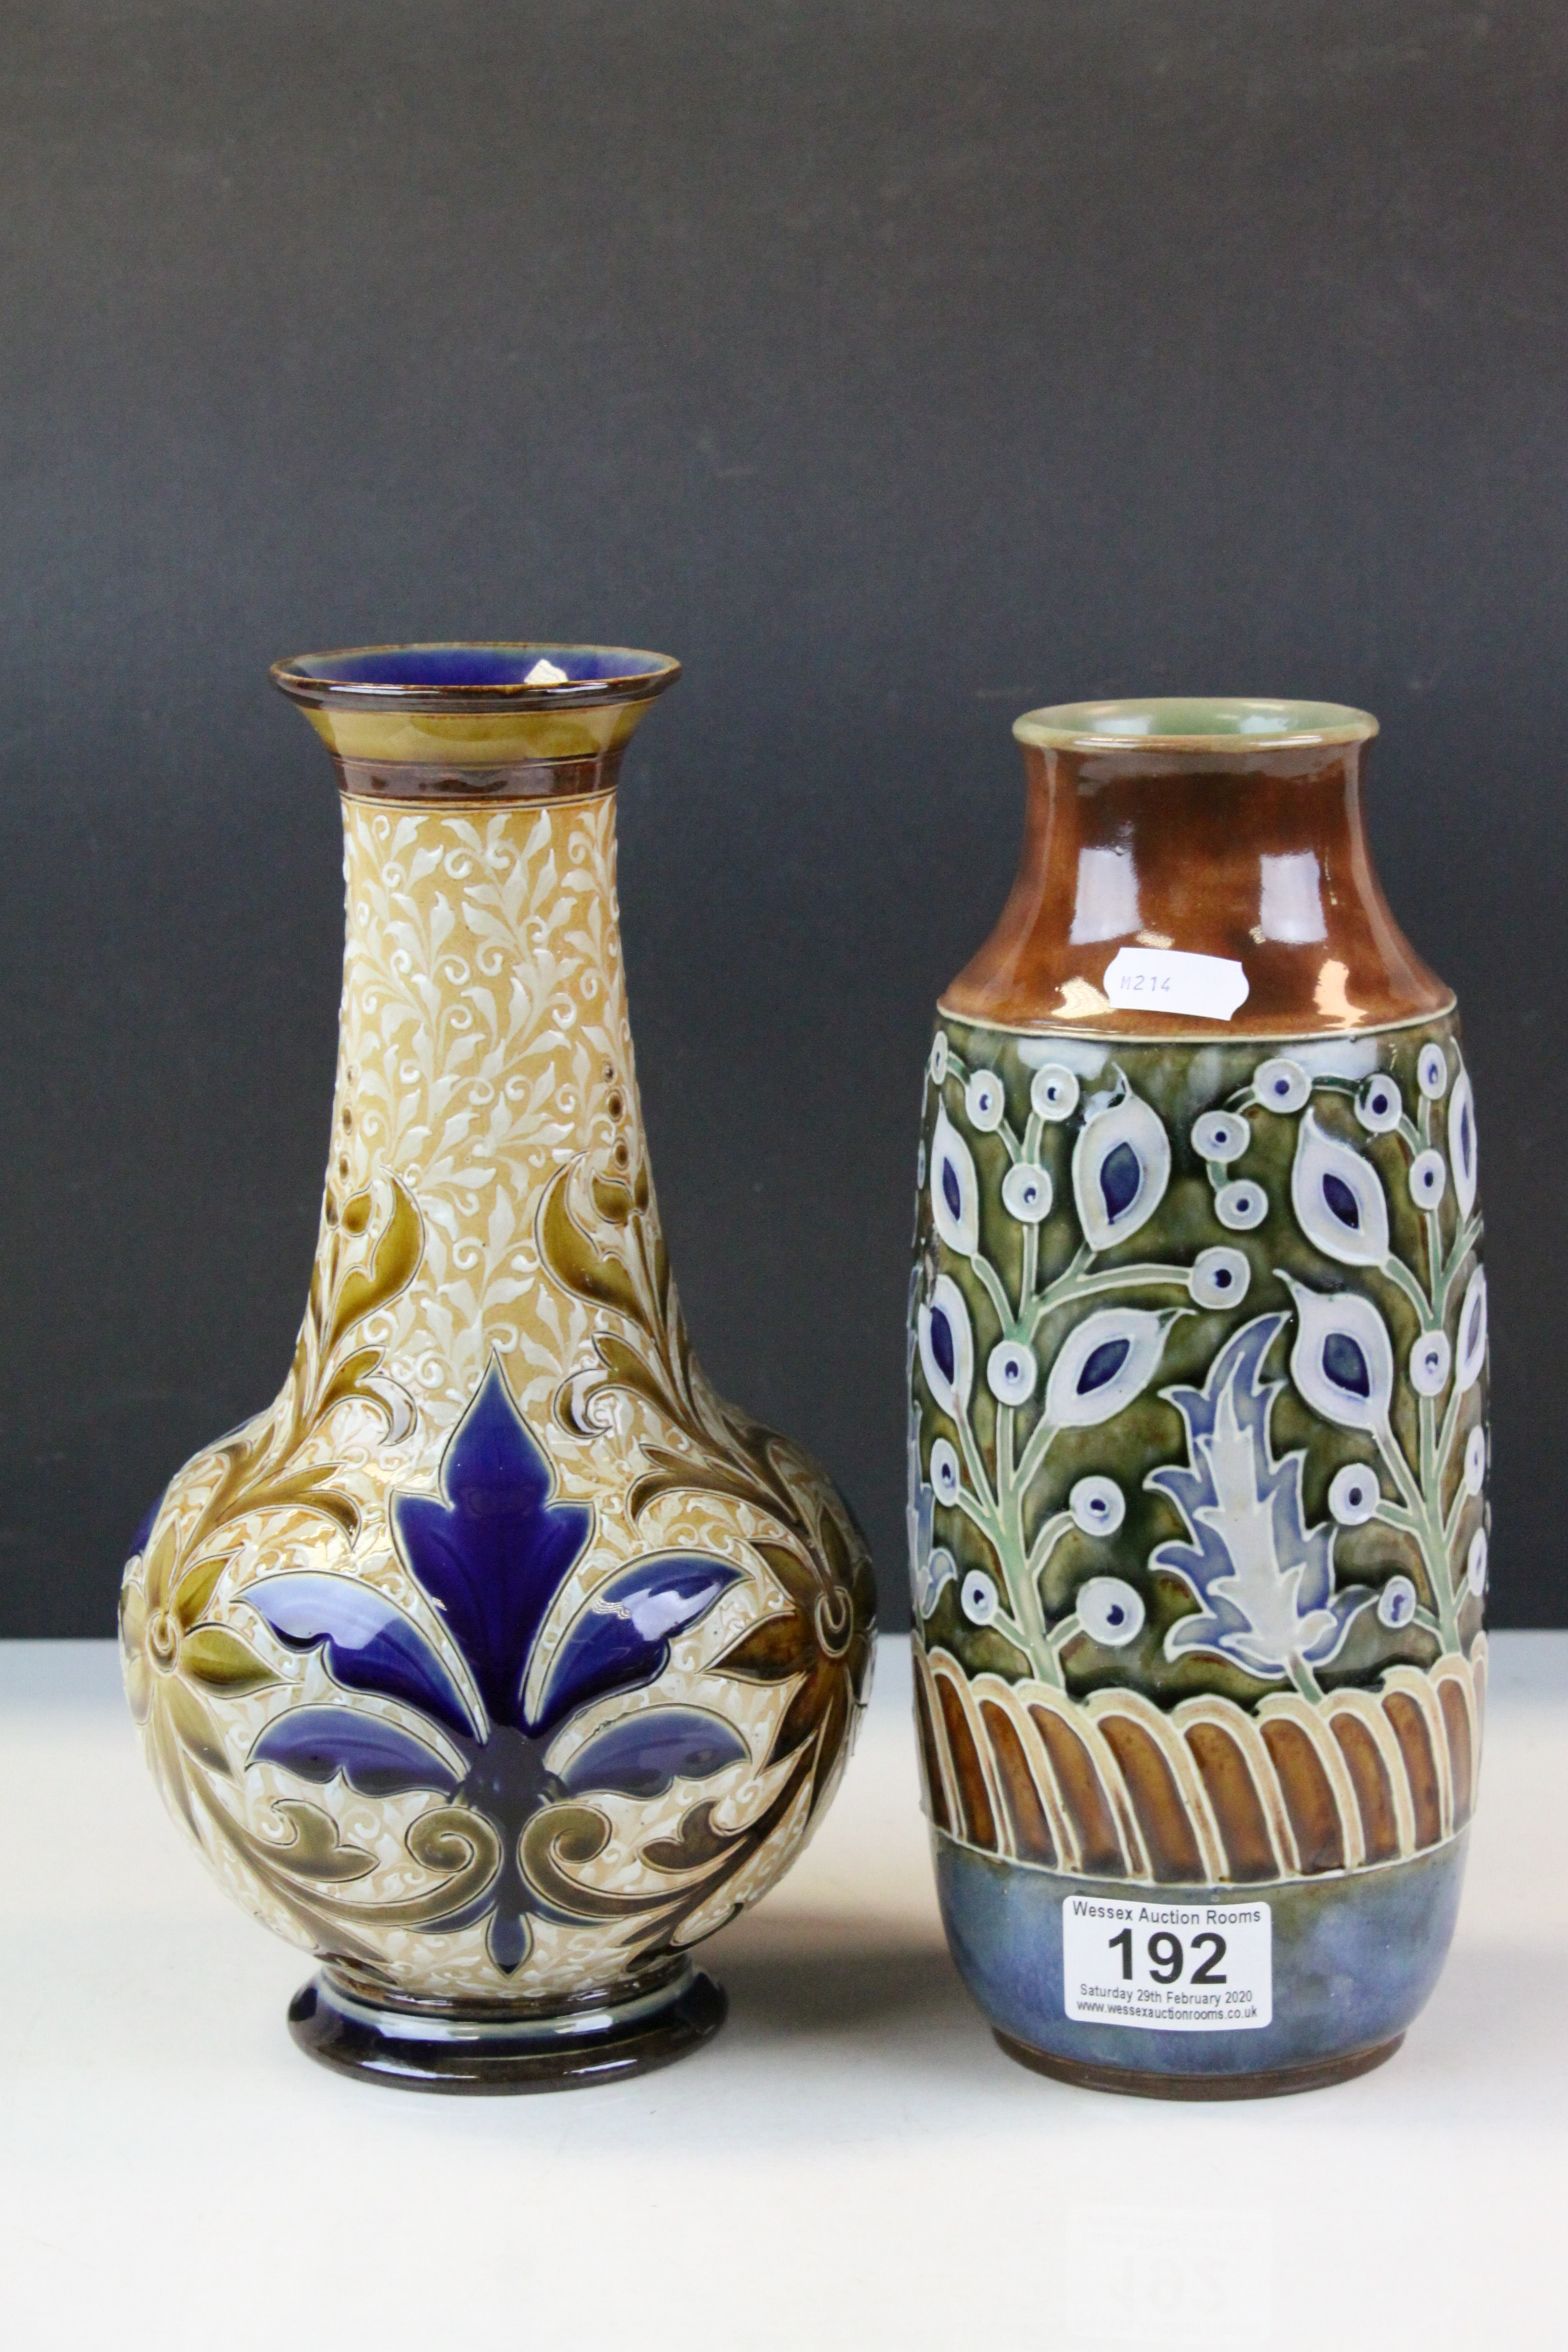 Doulton Lambeth late 19th century vase profusely decorated with leaf and flower decoration,